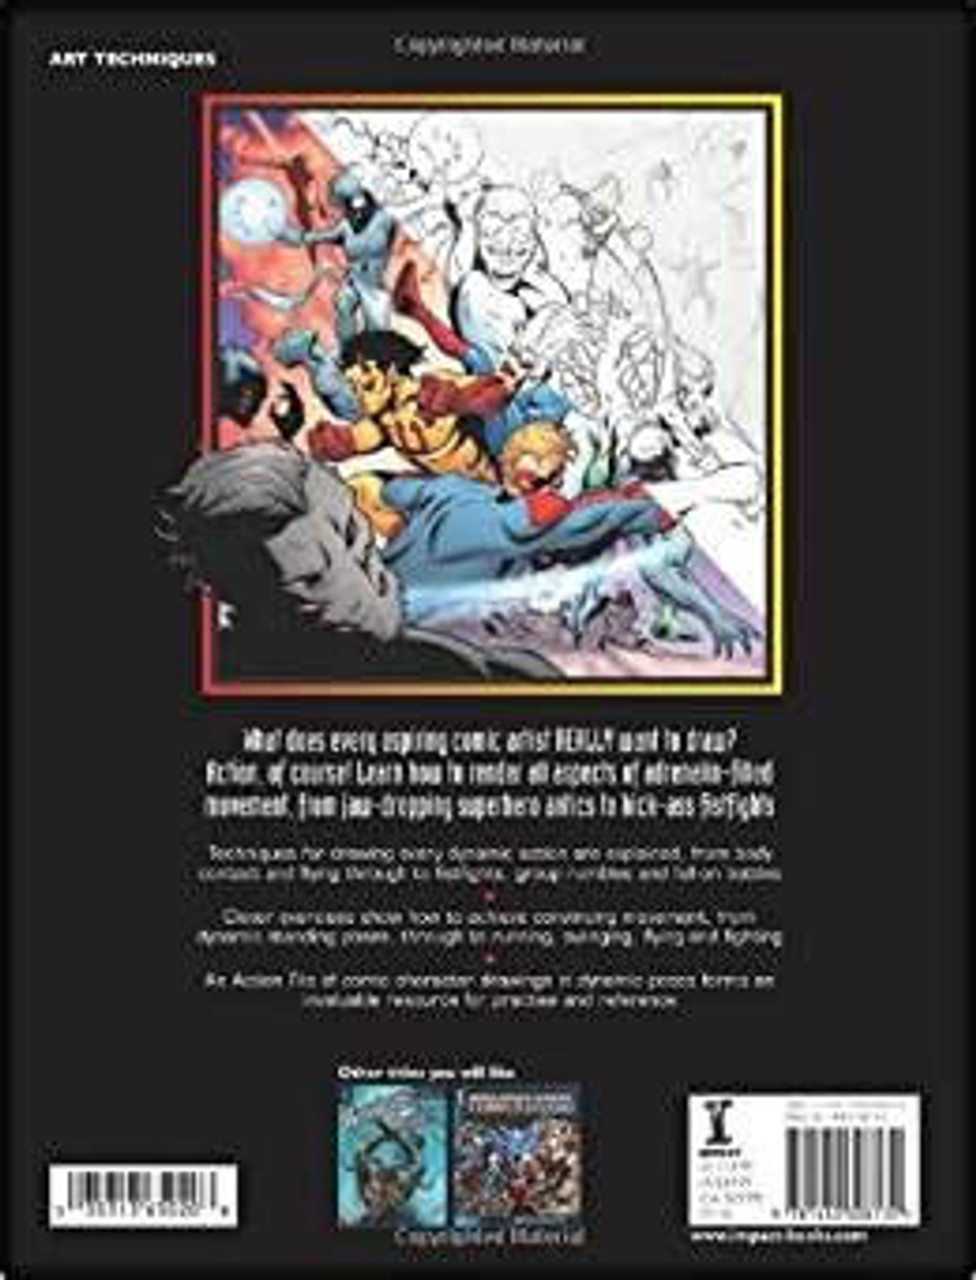 Art of Drawing Comic Books Kit by Walter Foster Creative Team, Other Format